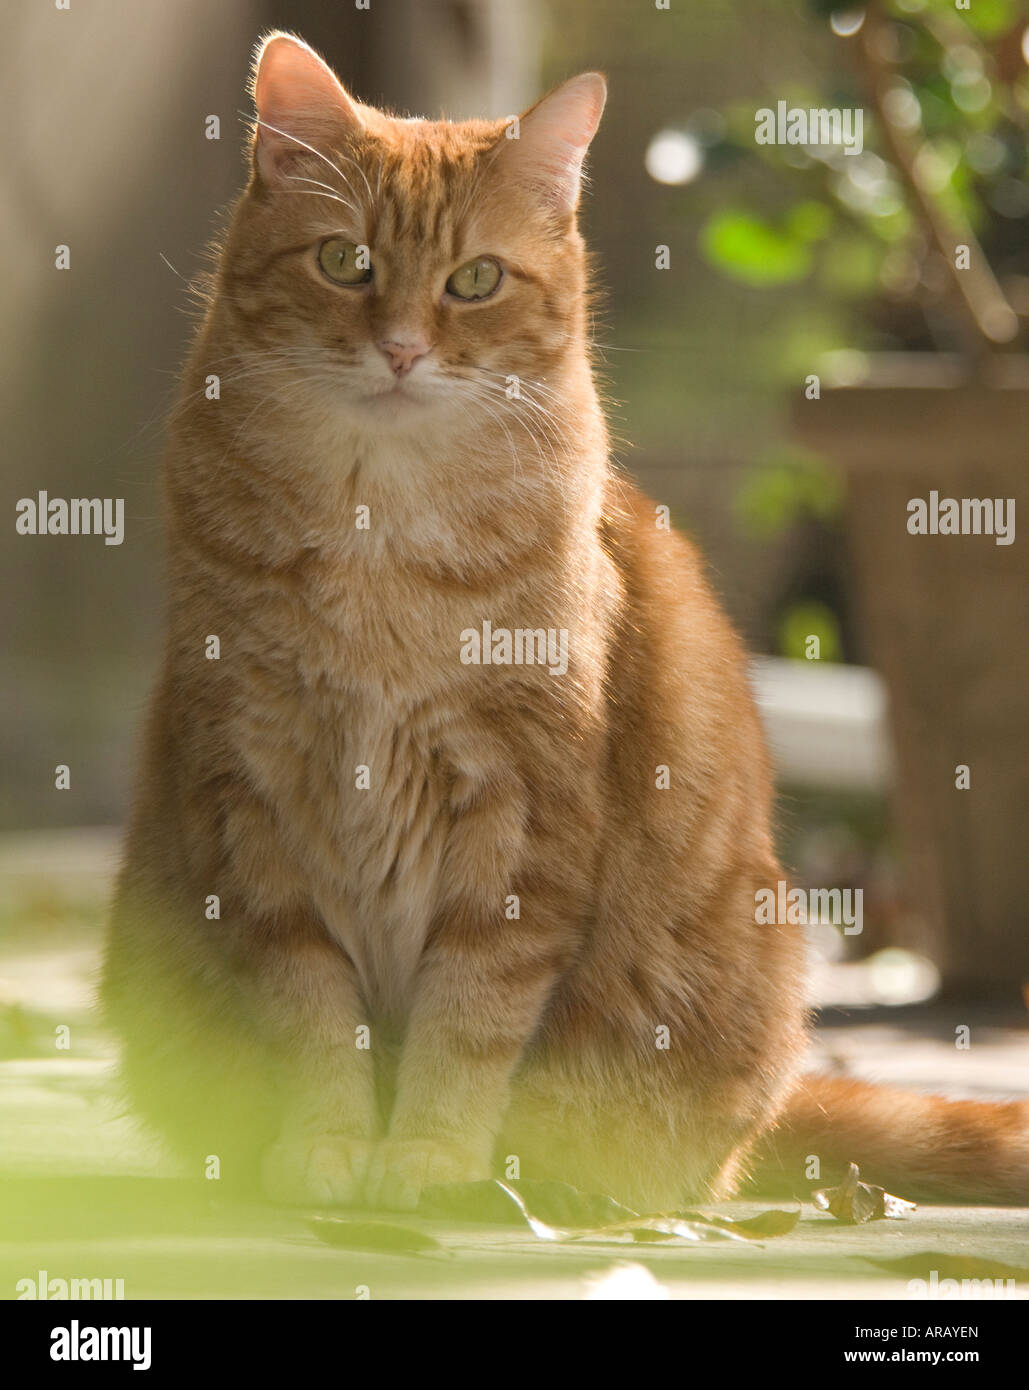 are most orange tabby cats male